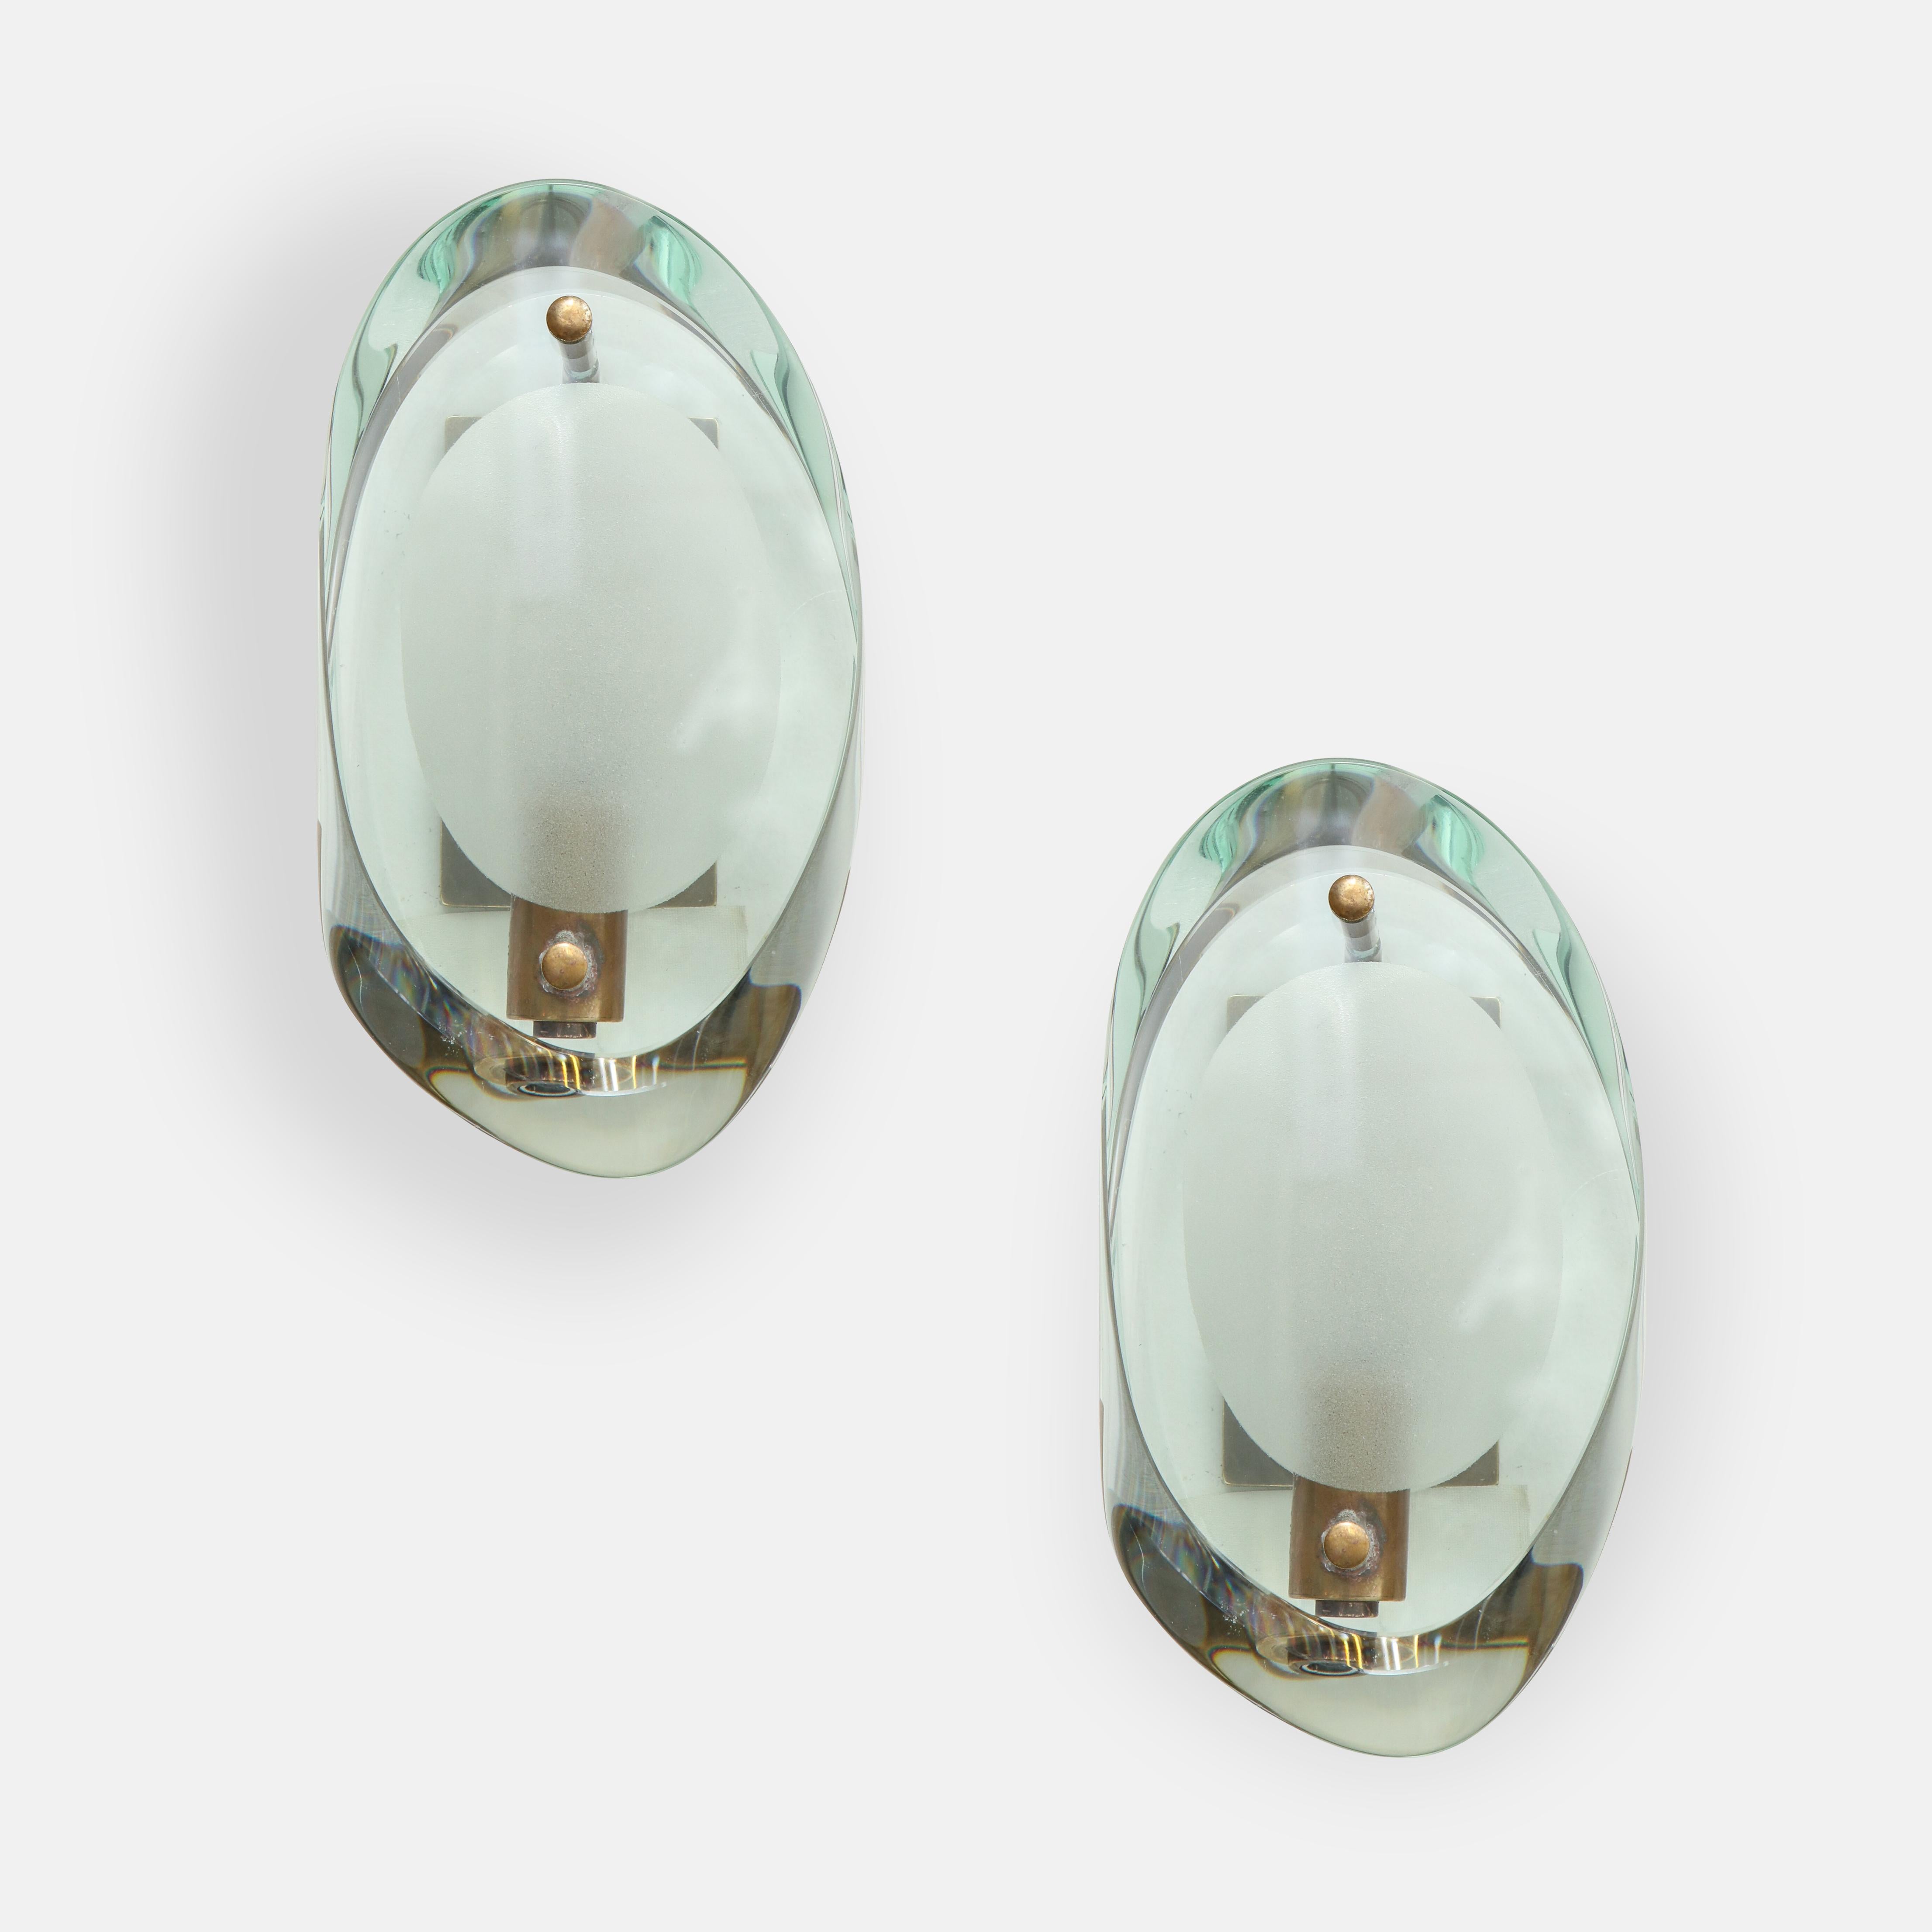 Max Ingrand for Fontana Arte model 2093 pair of sconces consisting of double lens cut panels of thick profiled polished glass with etched glass centers on brass mount and matching custom backplate, Italy, circa 1961.
Recently rewired to U.S.